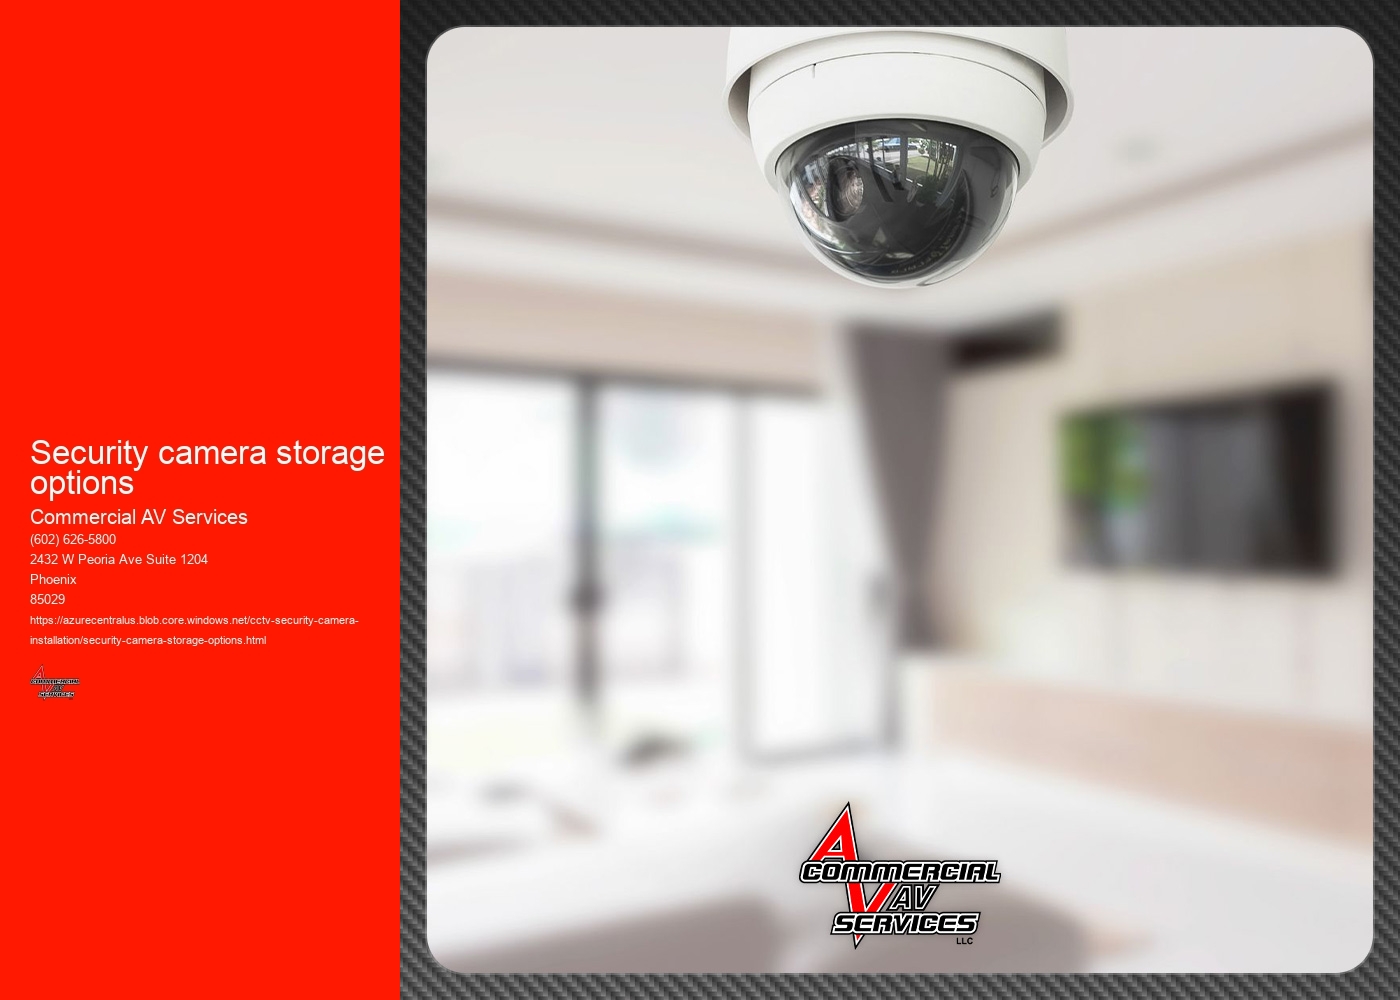 What are the best practices for managing and organizing large volumes of security camera footage to optimize storage space and retrieval efficiency?